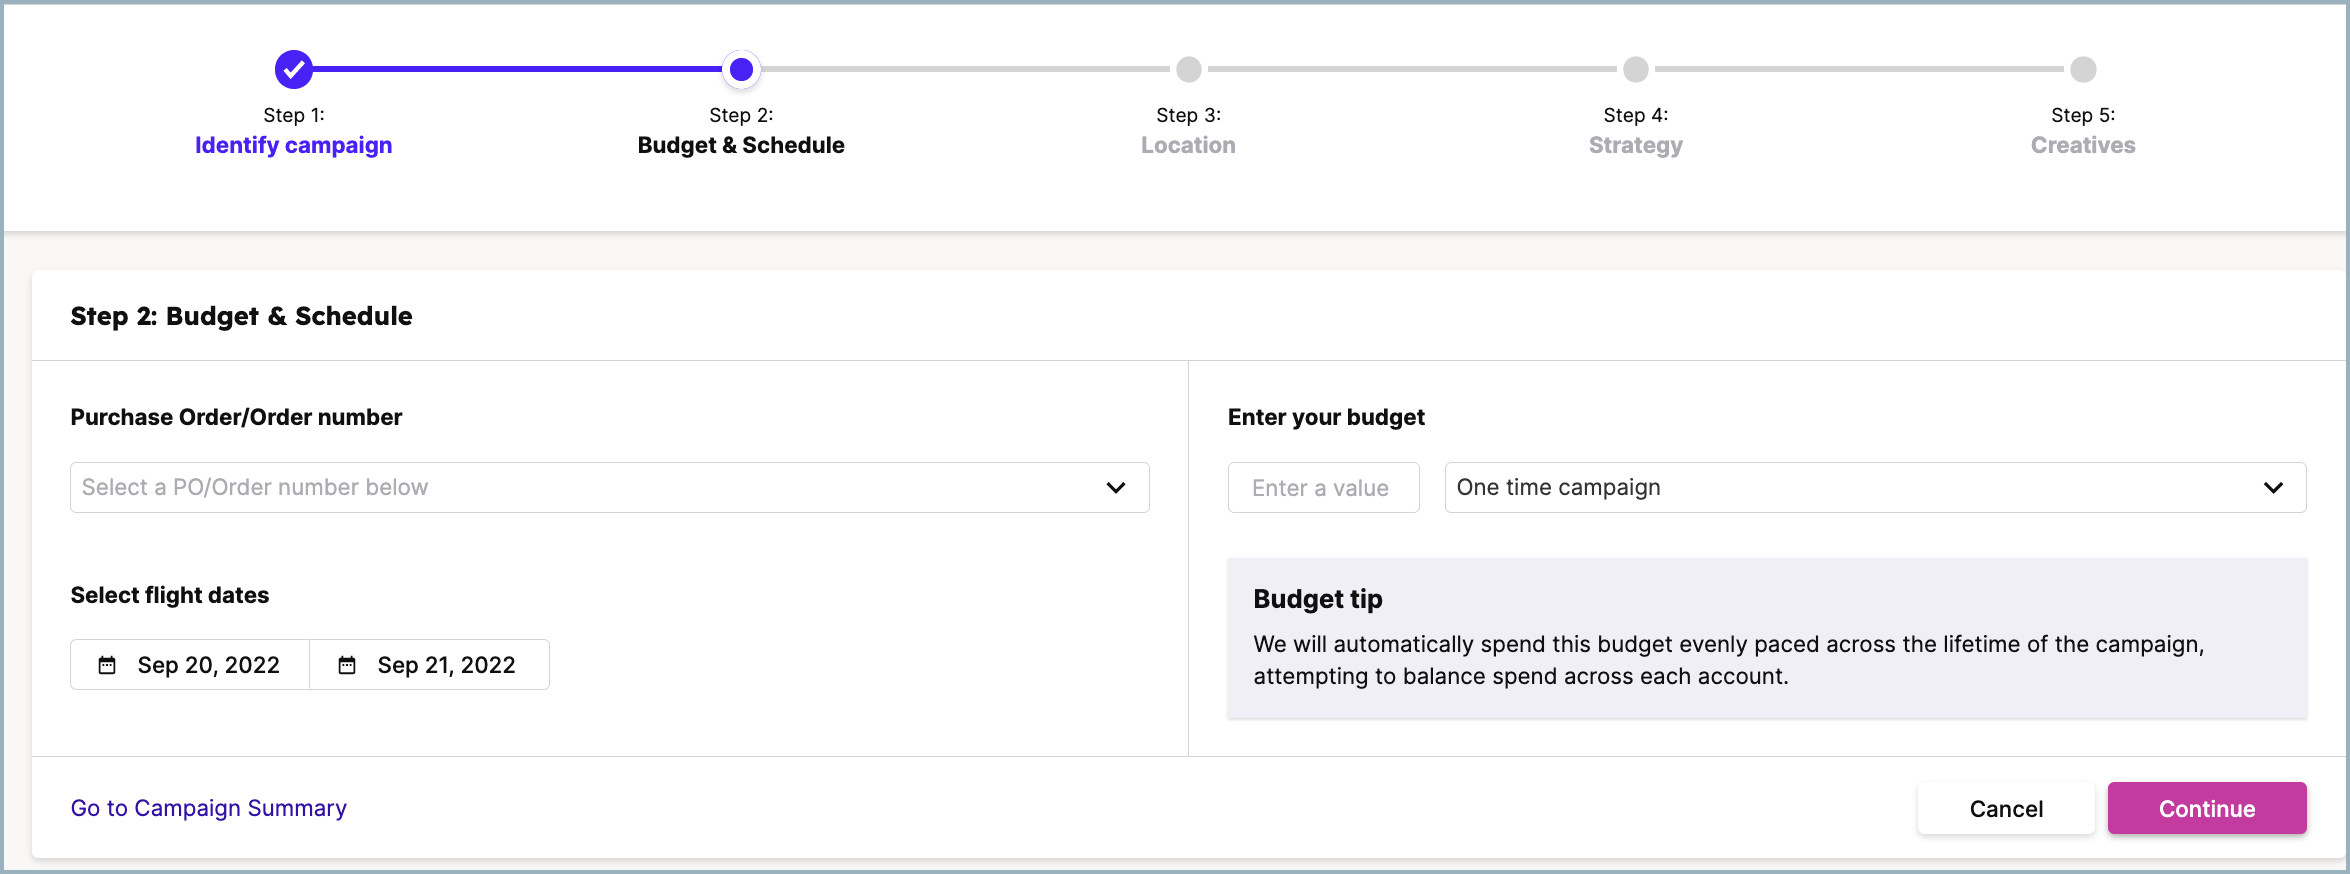 Step_2_Budget_and_Schedule.png